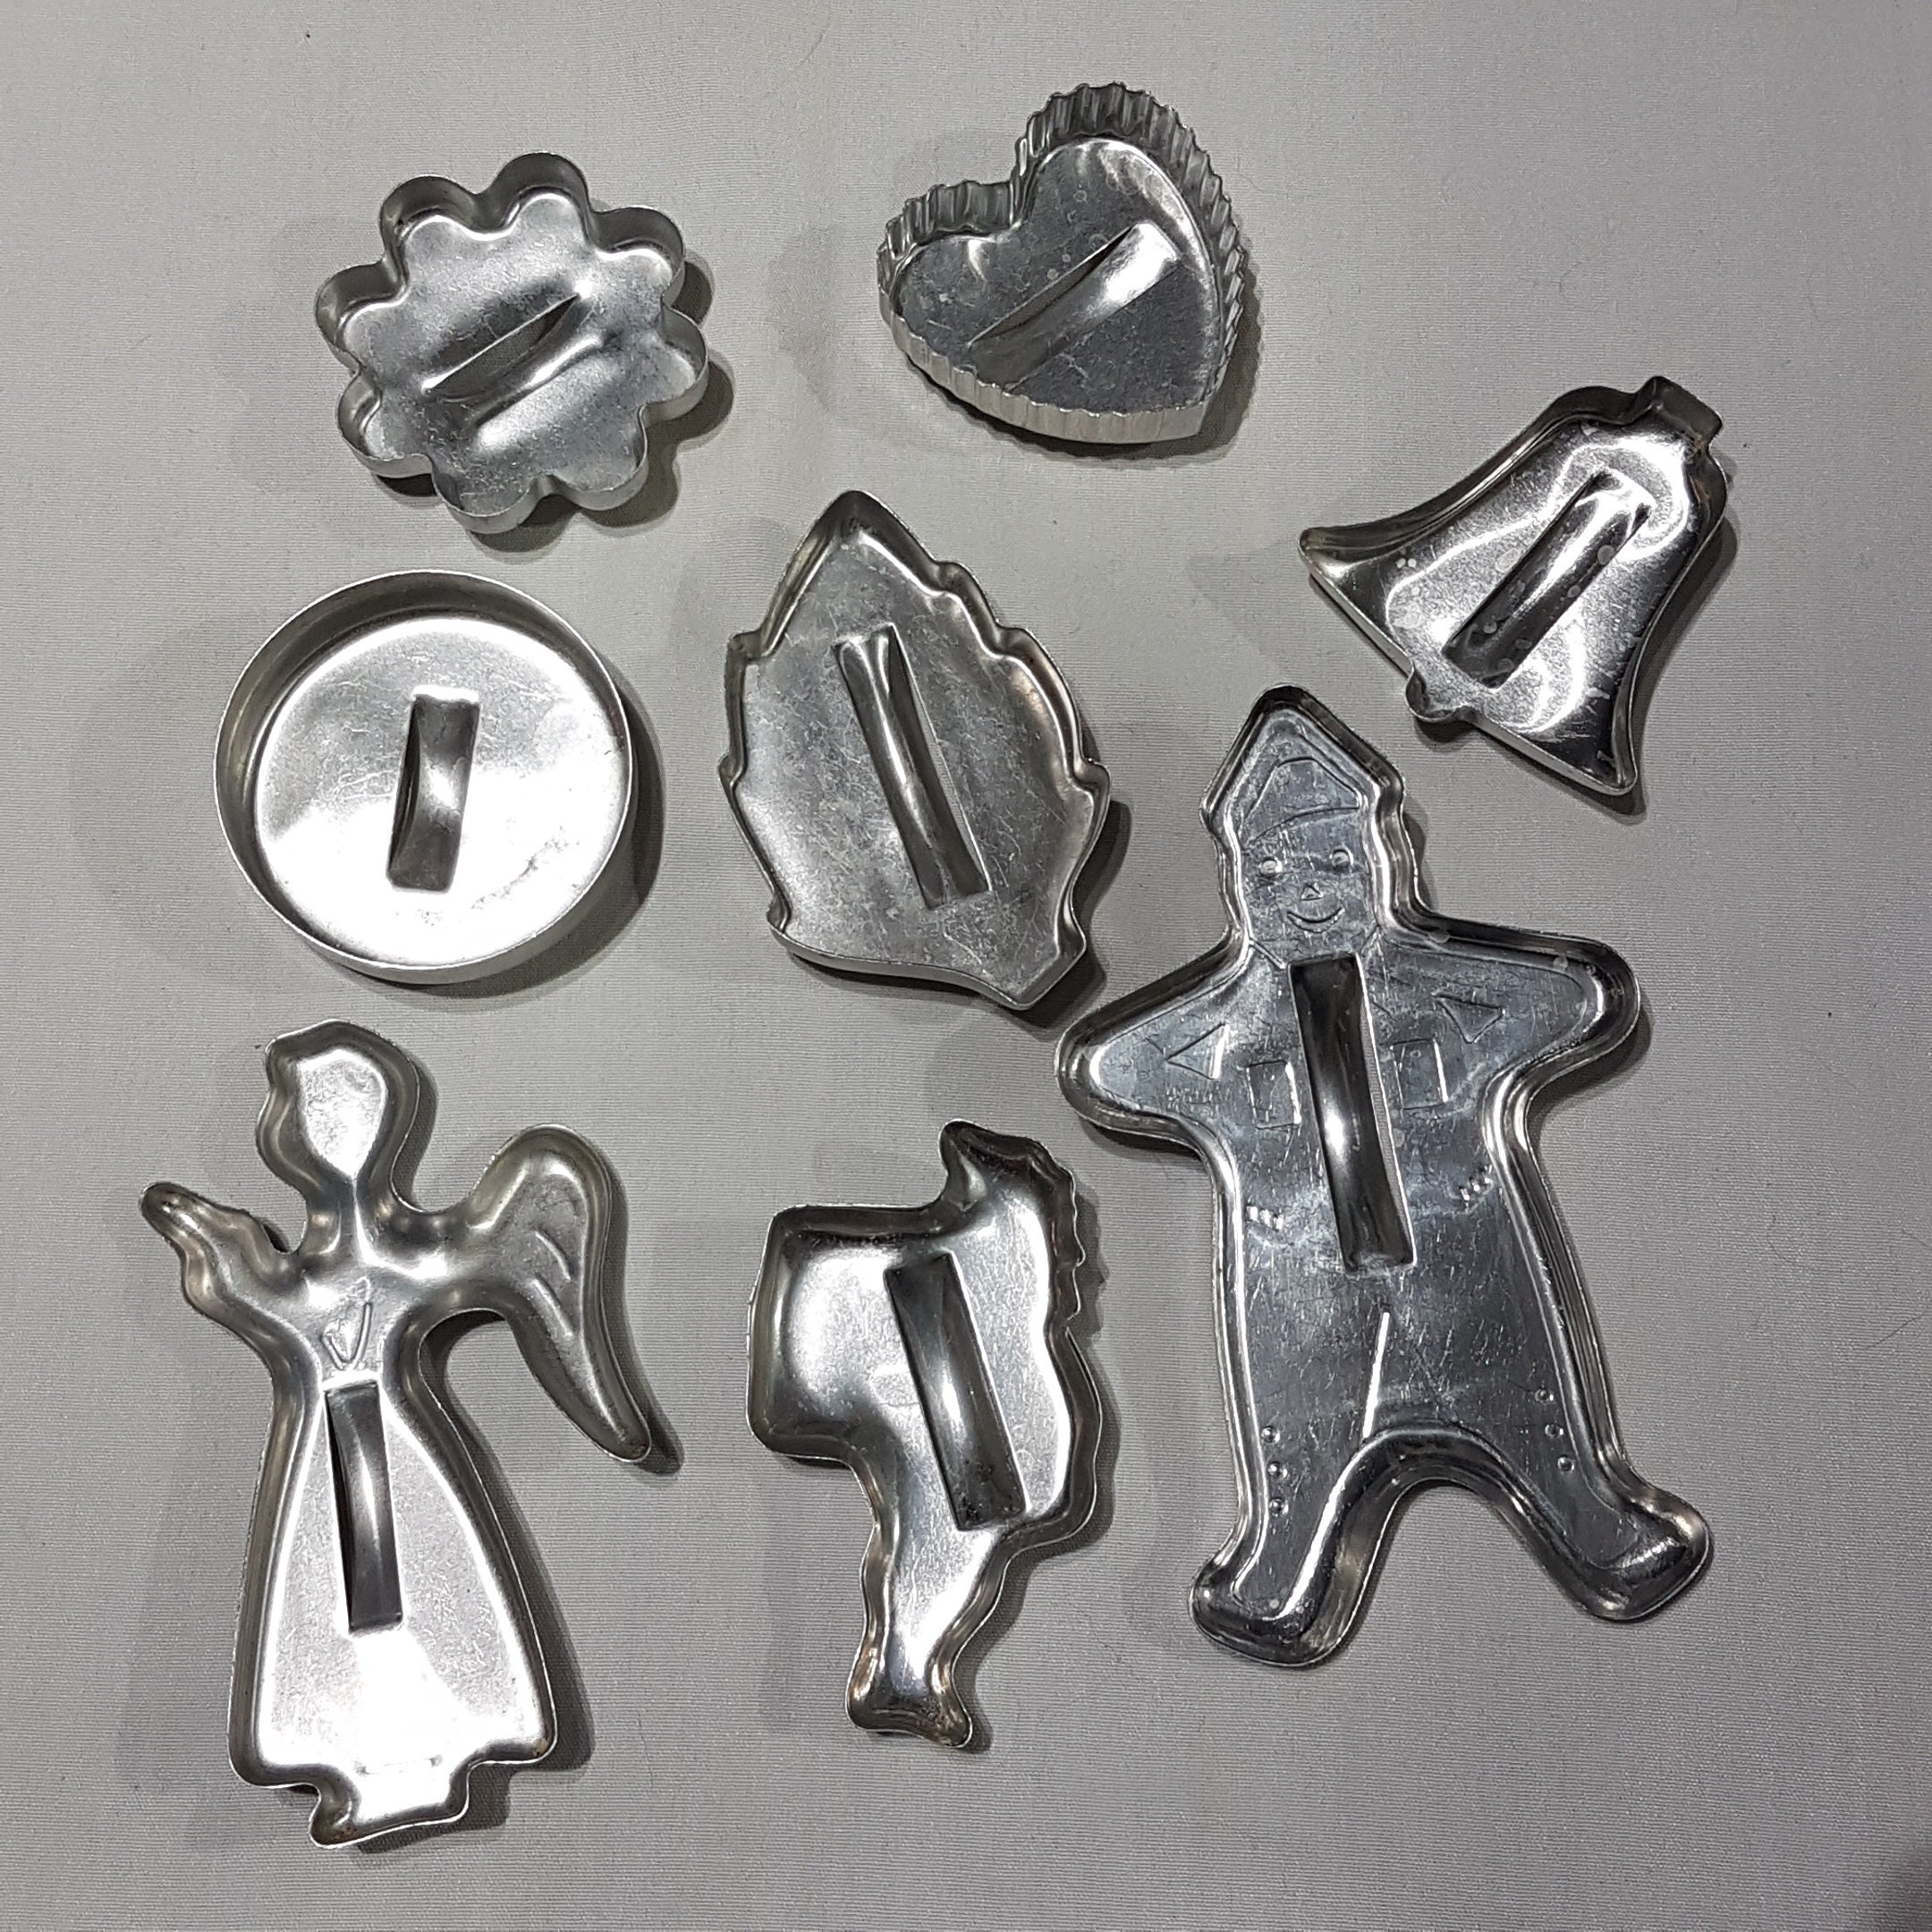 Lot of 8 Vintage Tin Aluminum Cookie Cutters, Biscuit Cutters, 1940's